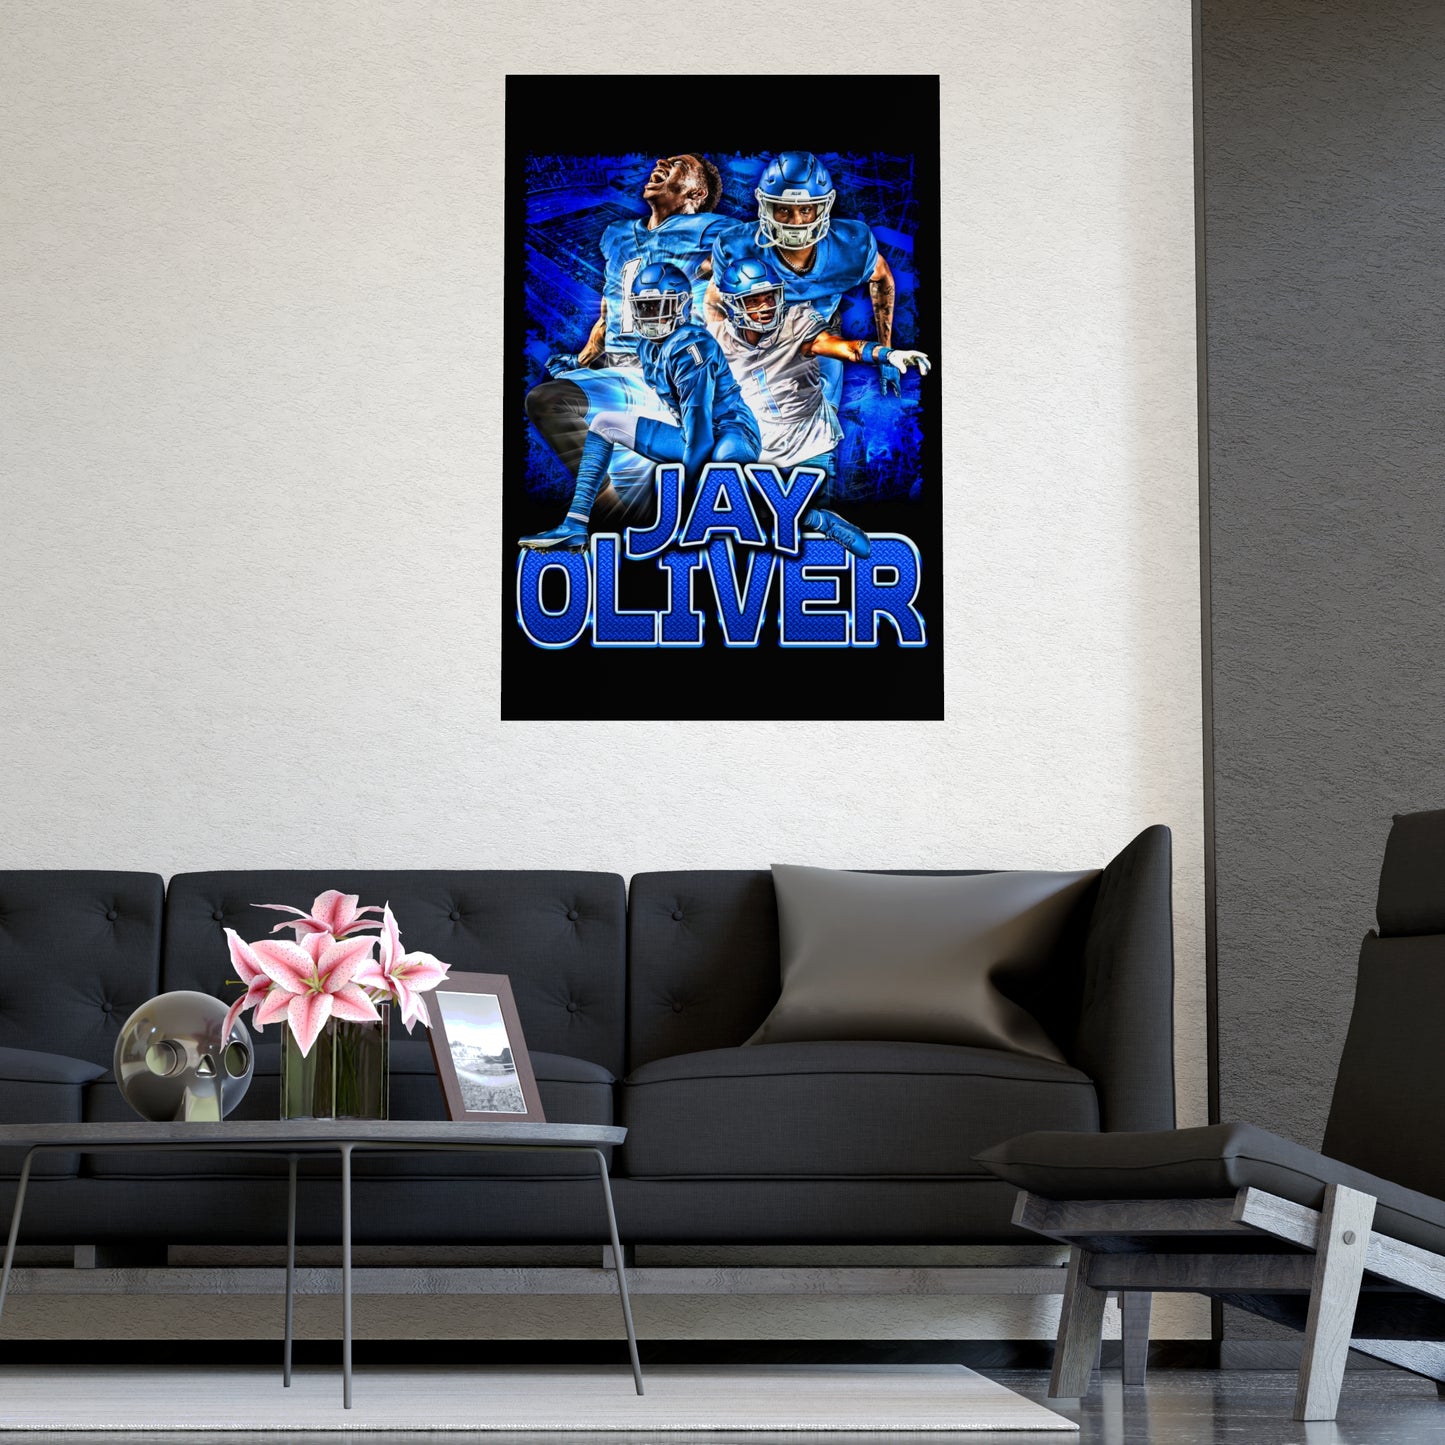 JAY OLIVER 24"x36" POSTER